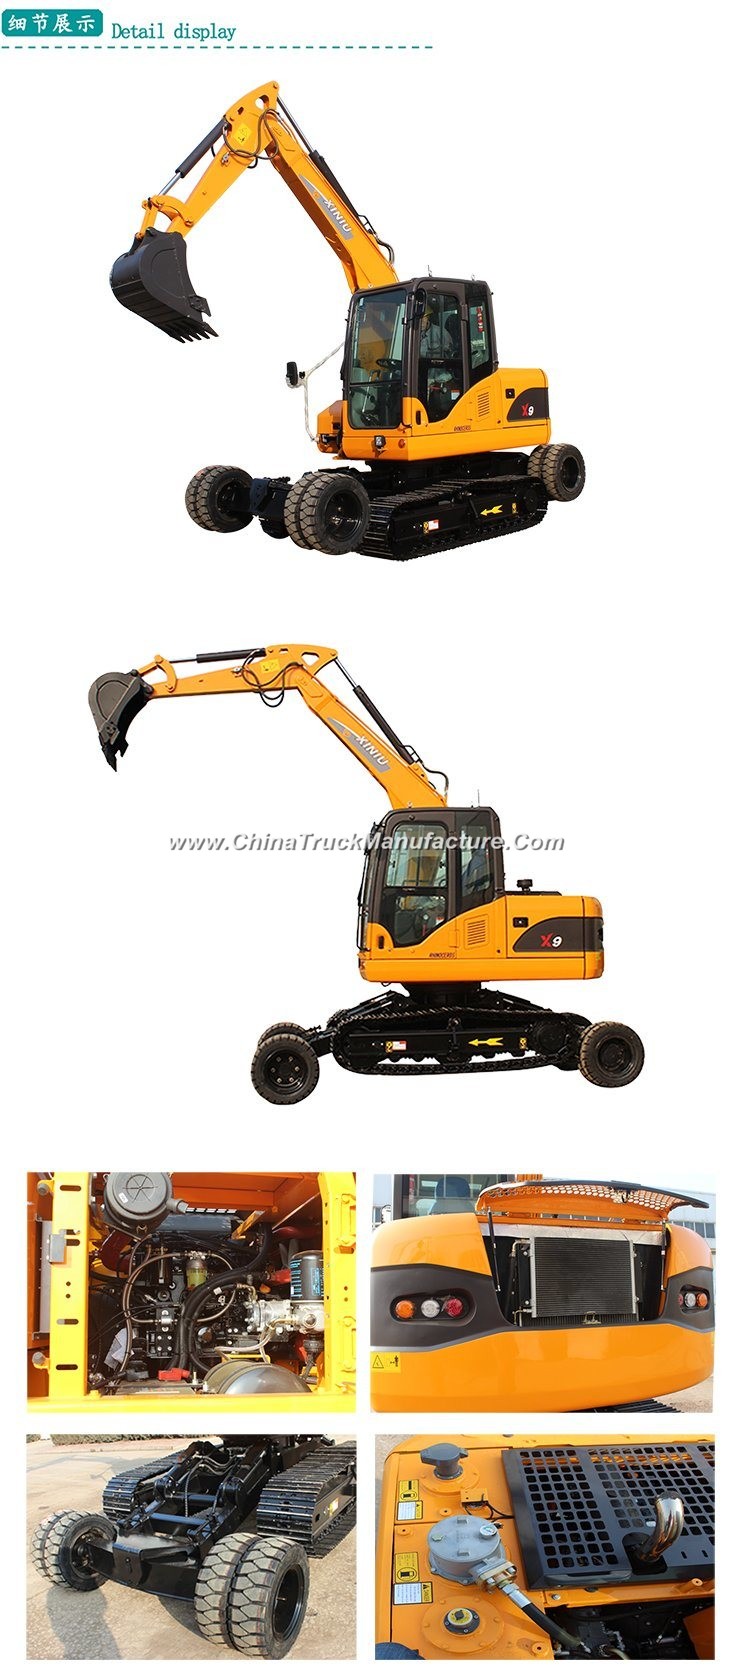 New 9 Ton Wheel & Crawler Excavator X9 Aux Hydraulics Must Be Able to Import to Canada EPA Engin